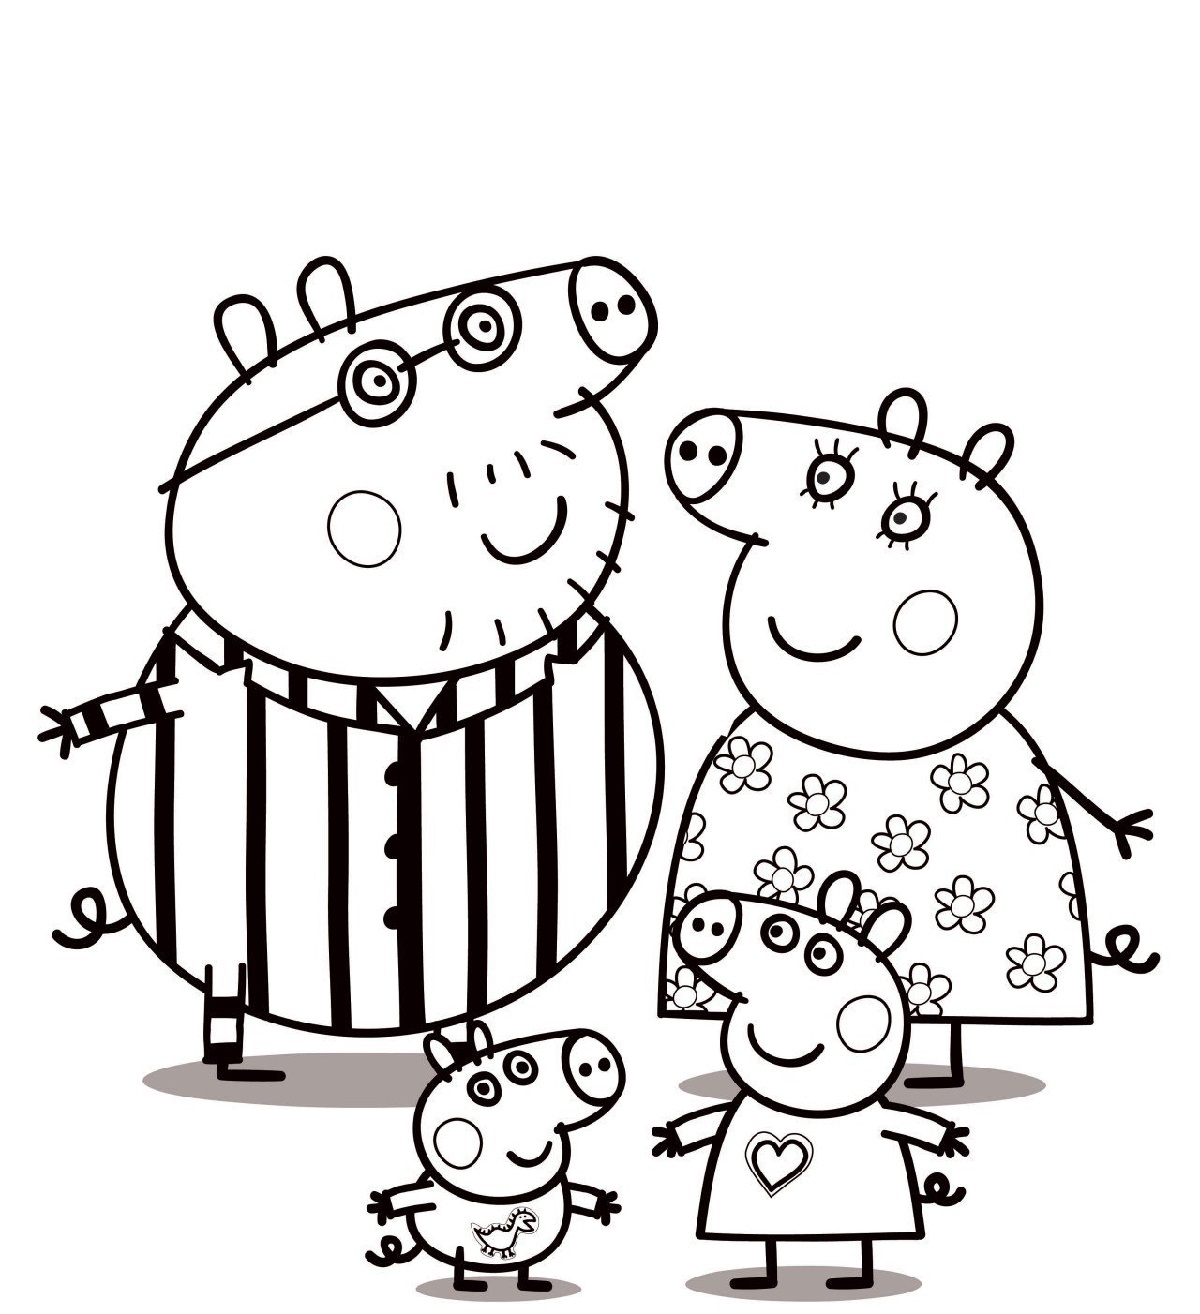 Peppa Pig Coloring Pages Printable and Free 101 Coloring